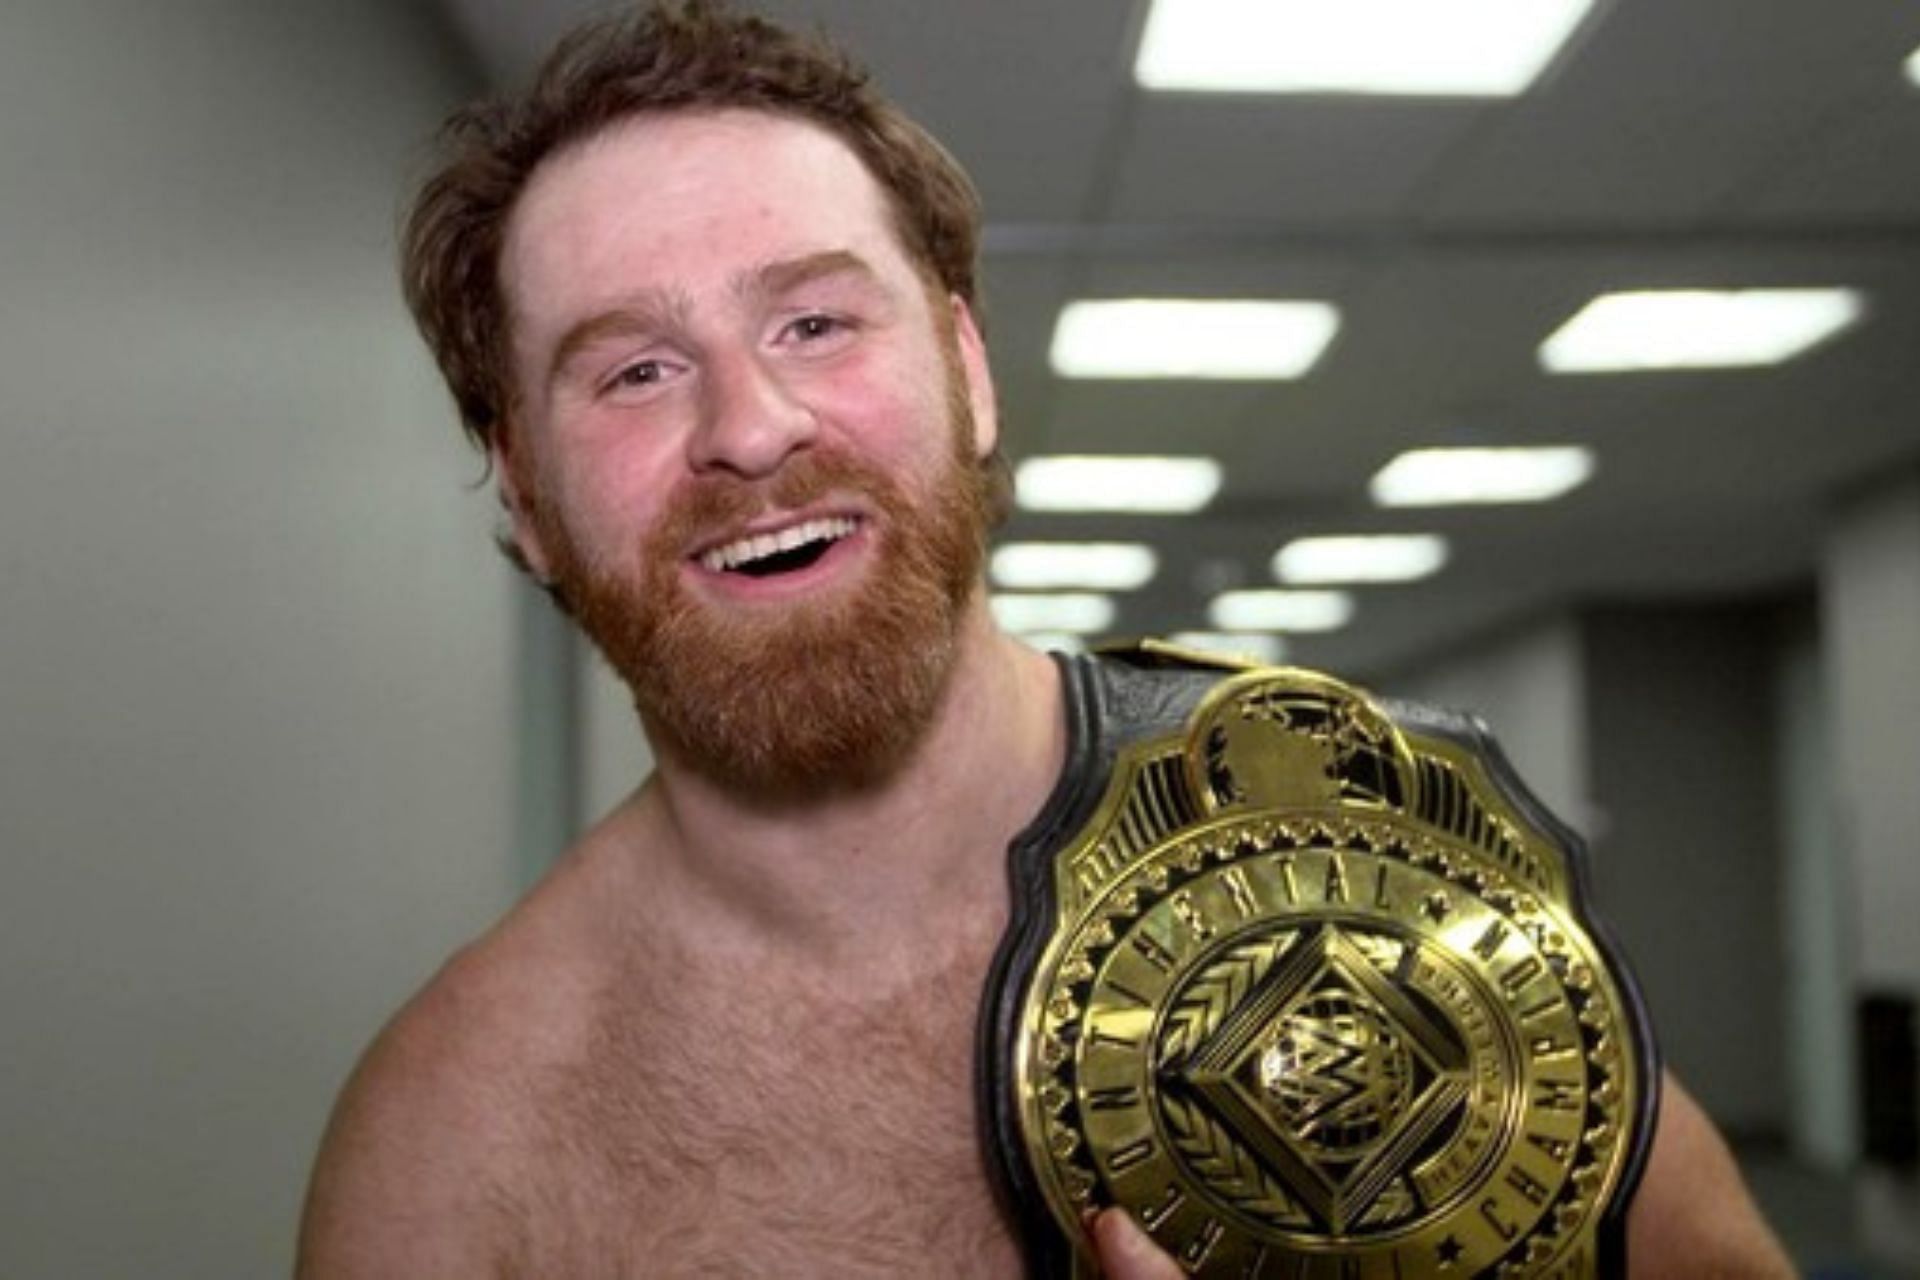 Sami Zayn was recently called out for a Social Media Post